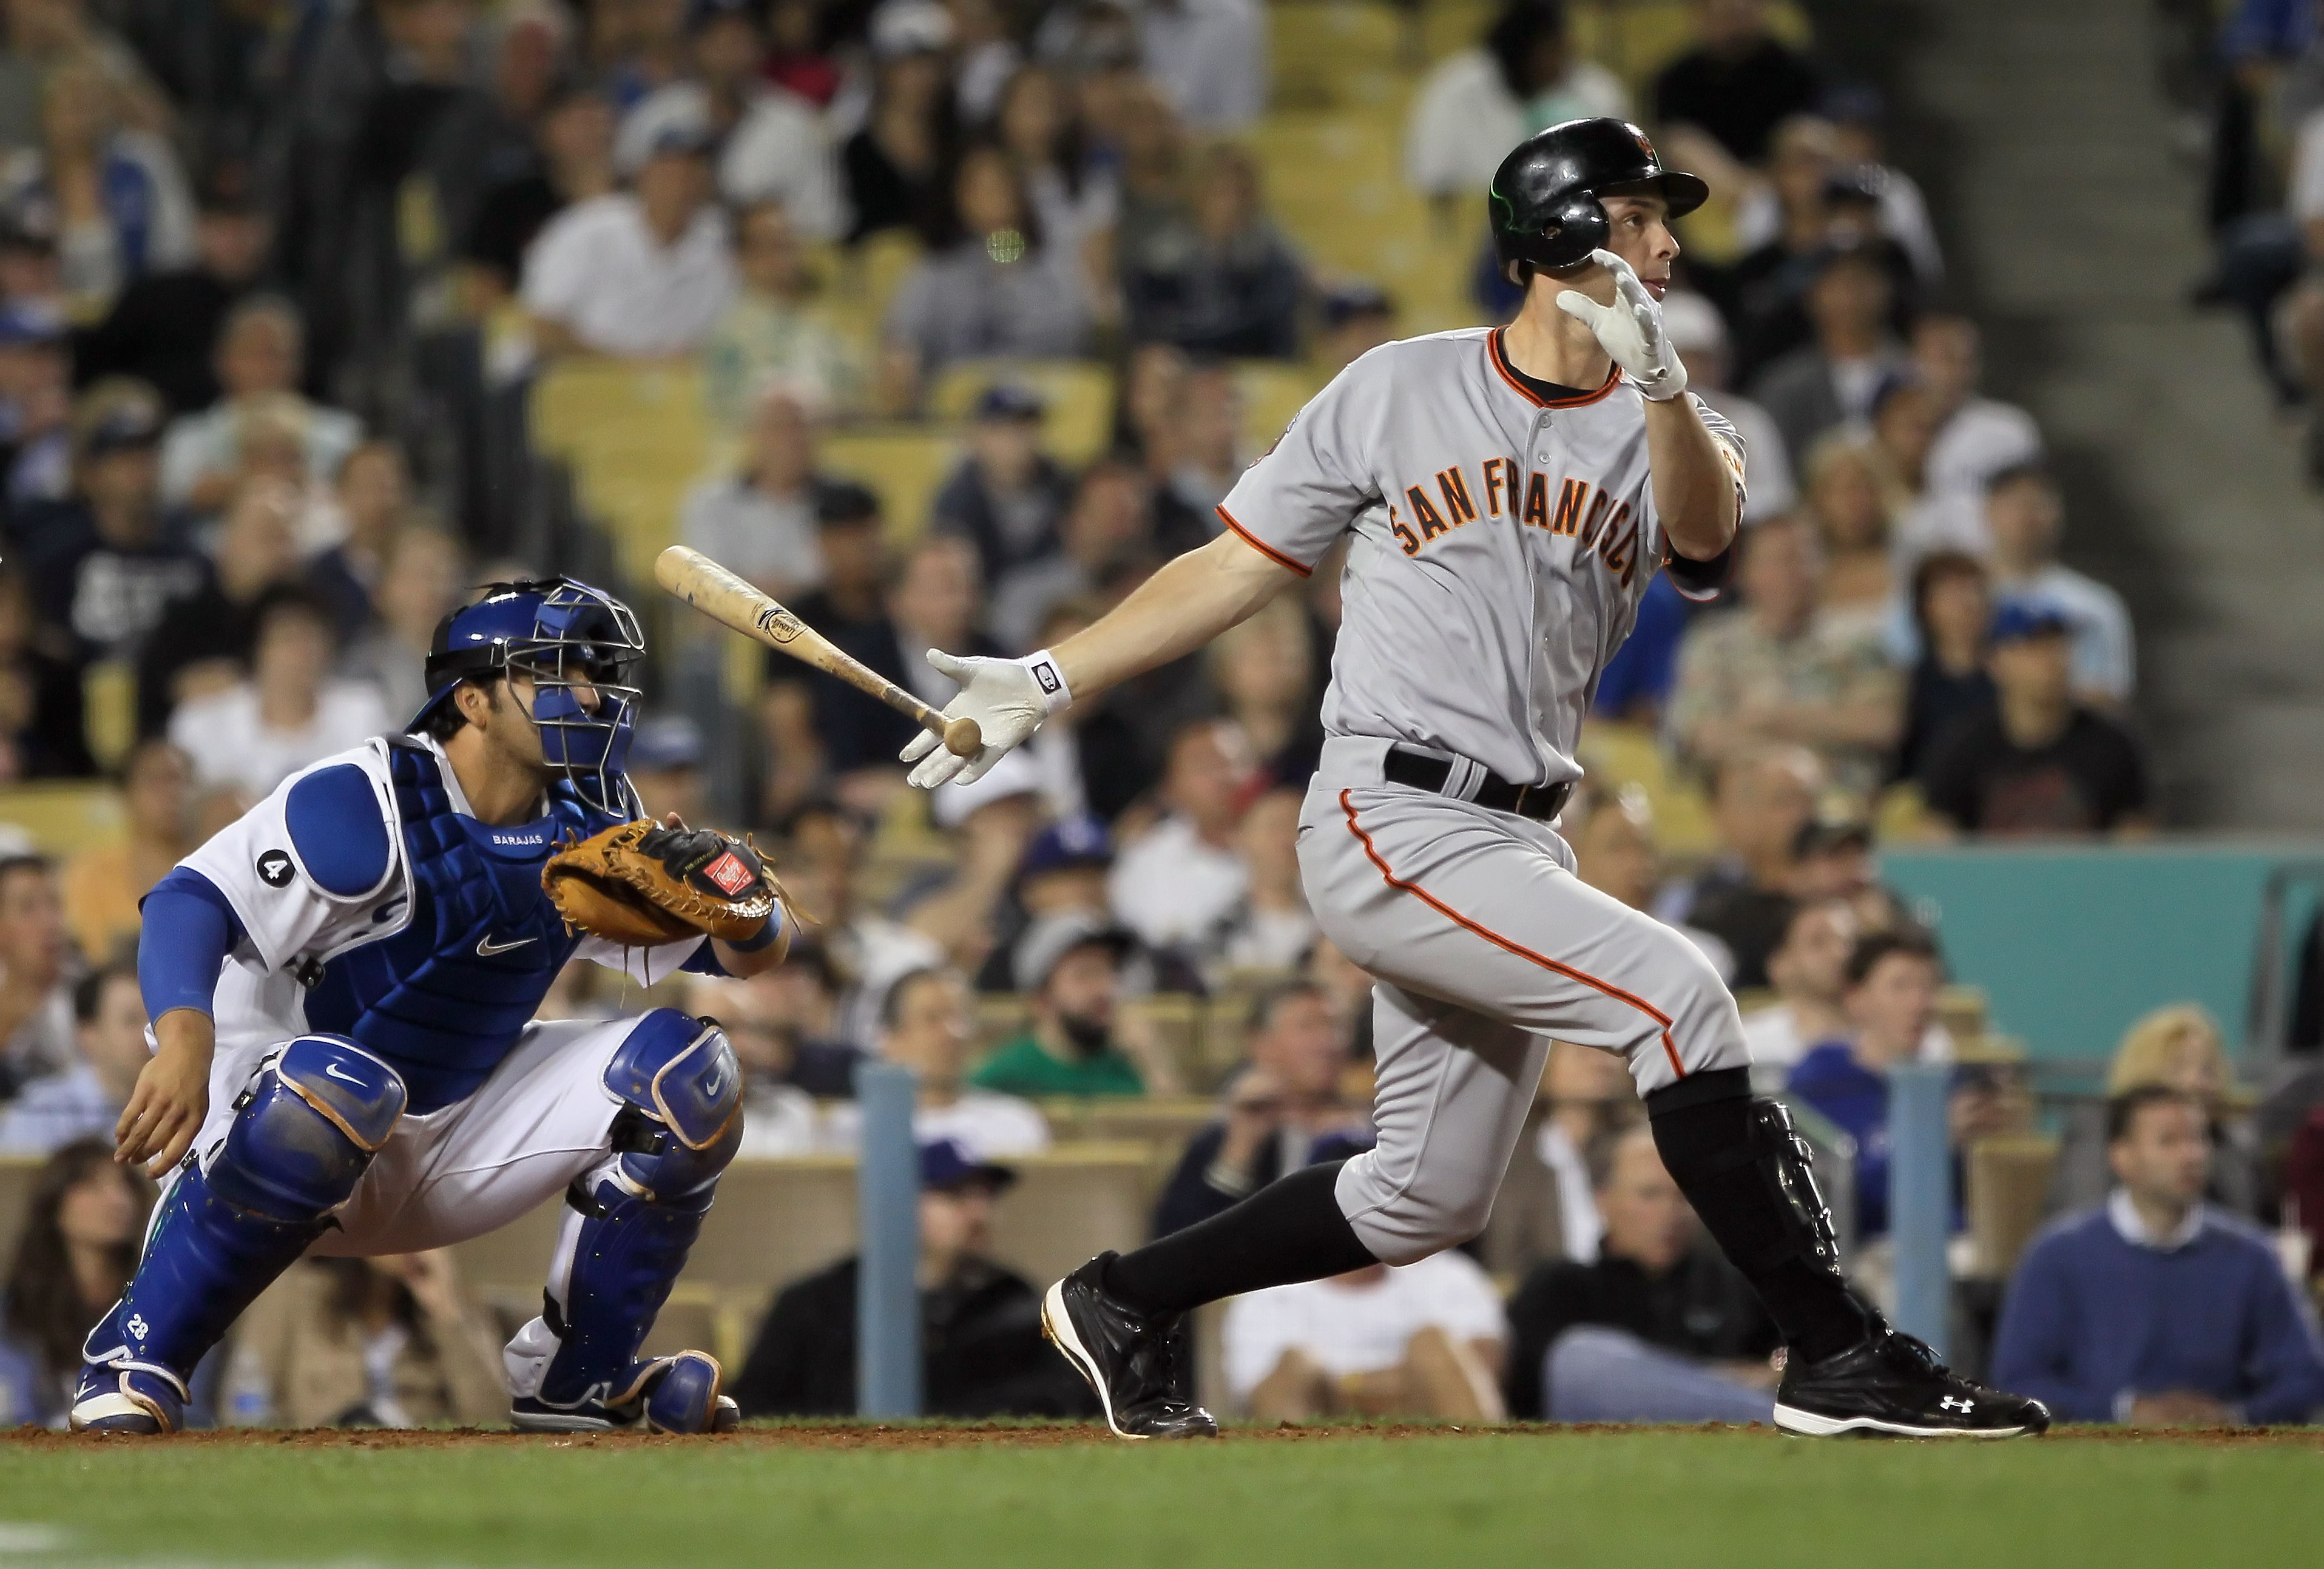 LOS ANGELES, CA - APRIL 01:  Brandon Belt #9 of the San Francisco Giants bats against the Los Angeles Dodgers at Dodger Stadium on April 1, 2011 in Los Angeles, California.  (Photo by Jeff Gross/Getty Images)